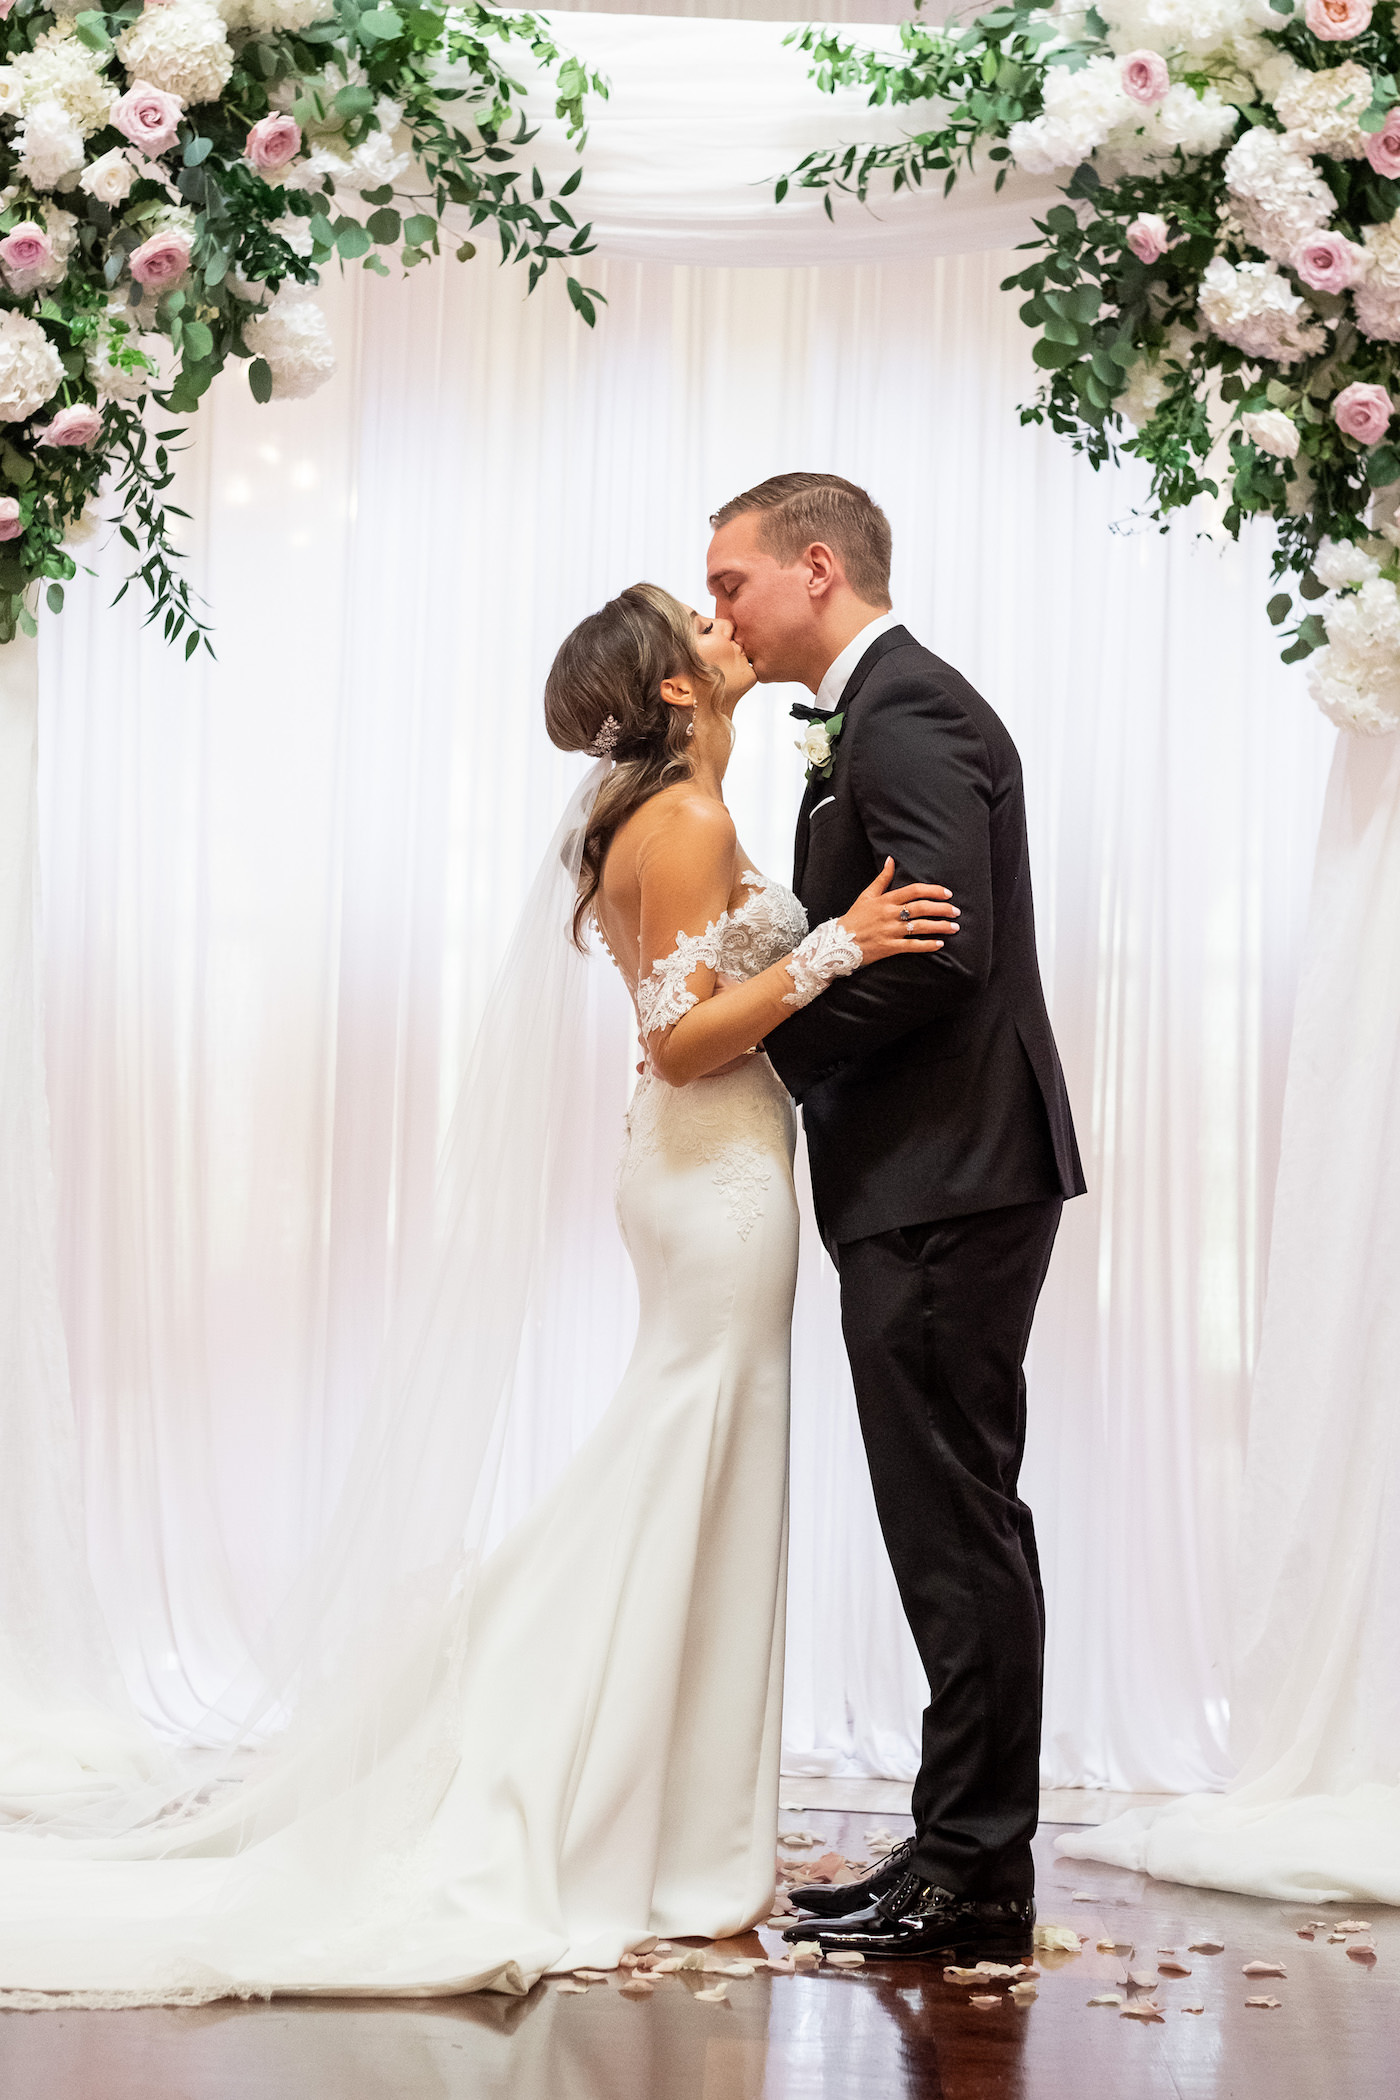 Bride and Groom First Kiss Bride and Groom Exchanging Vows during Indoor Ceremony with Pipe and Drape Backdrop with Blush Pink and Ivory Rose Floral Arrangements with Eucalyptus Greenery